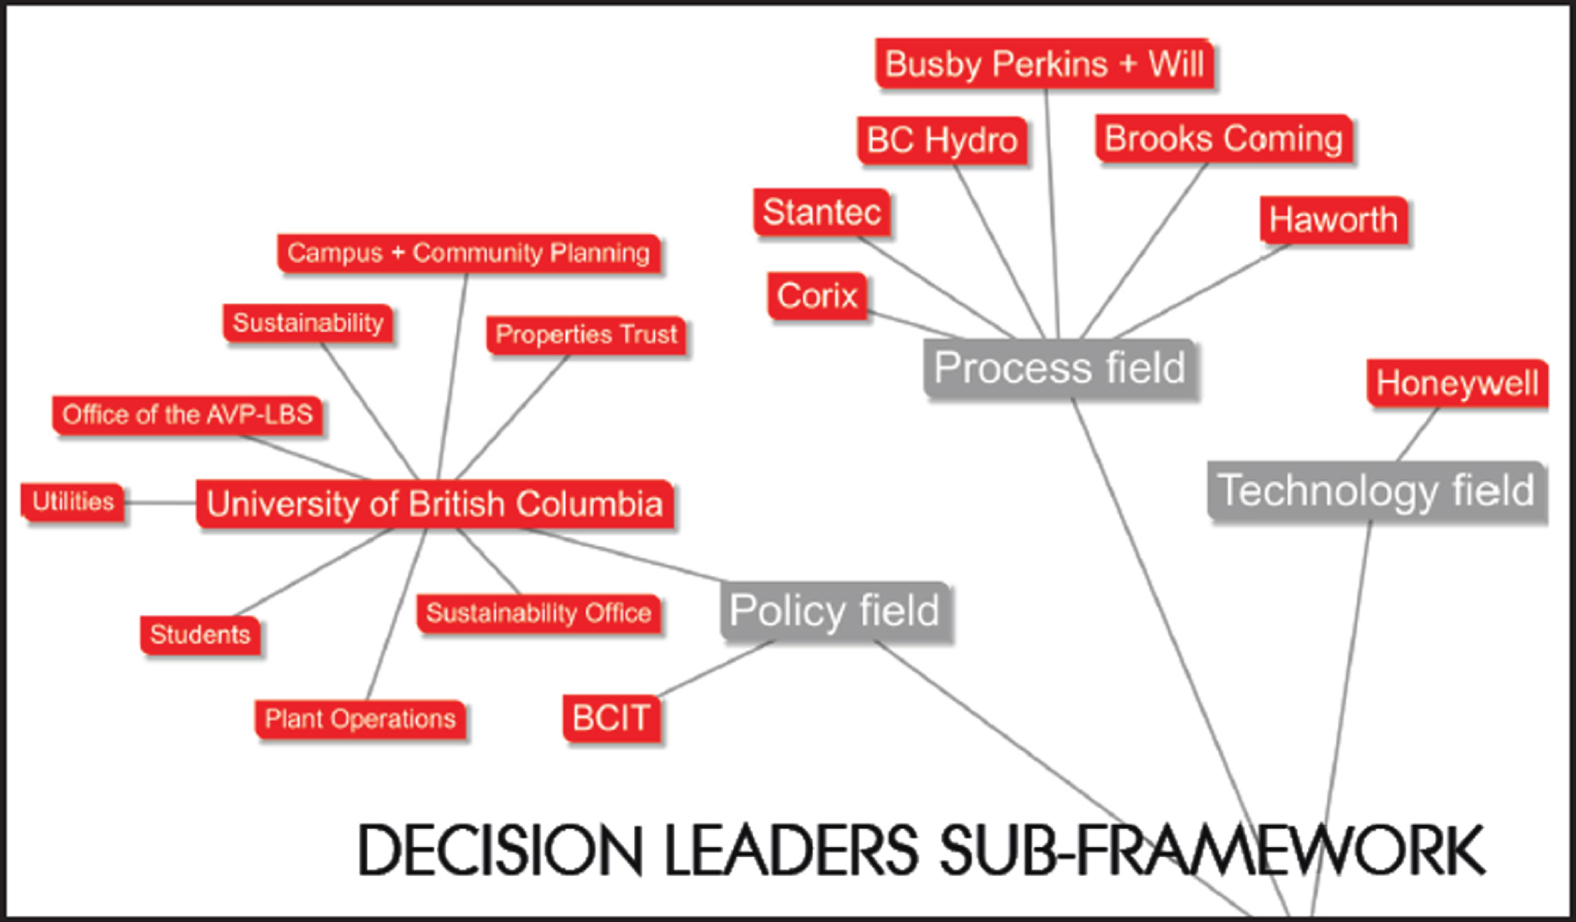 CIRS project specific organization model consisting of multiple partners as decision leaders in three main fields (Fedoruk et al., 2012).